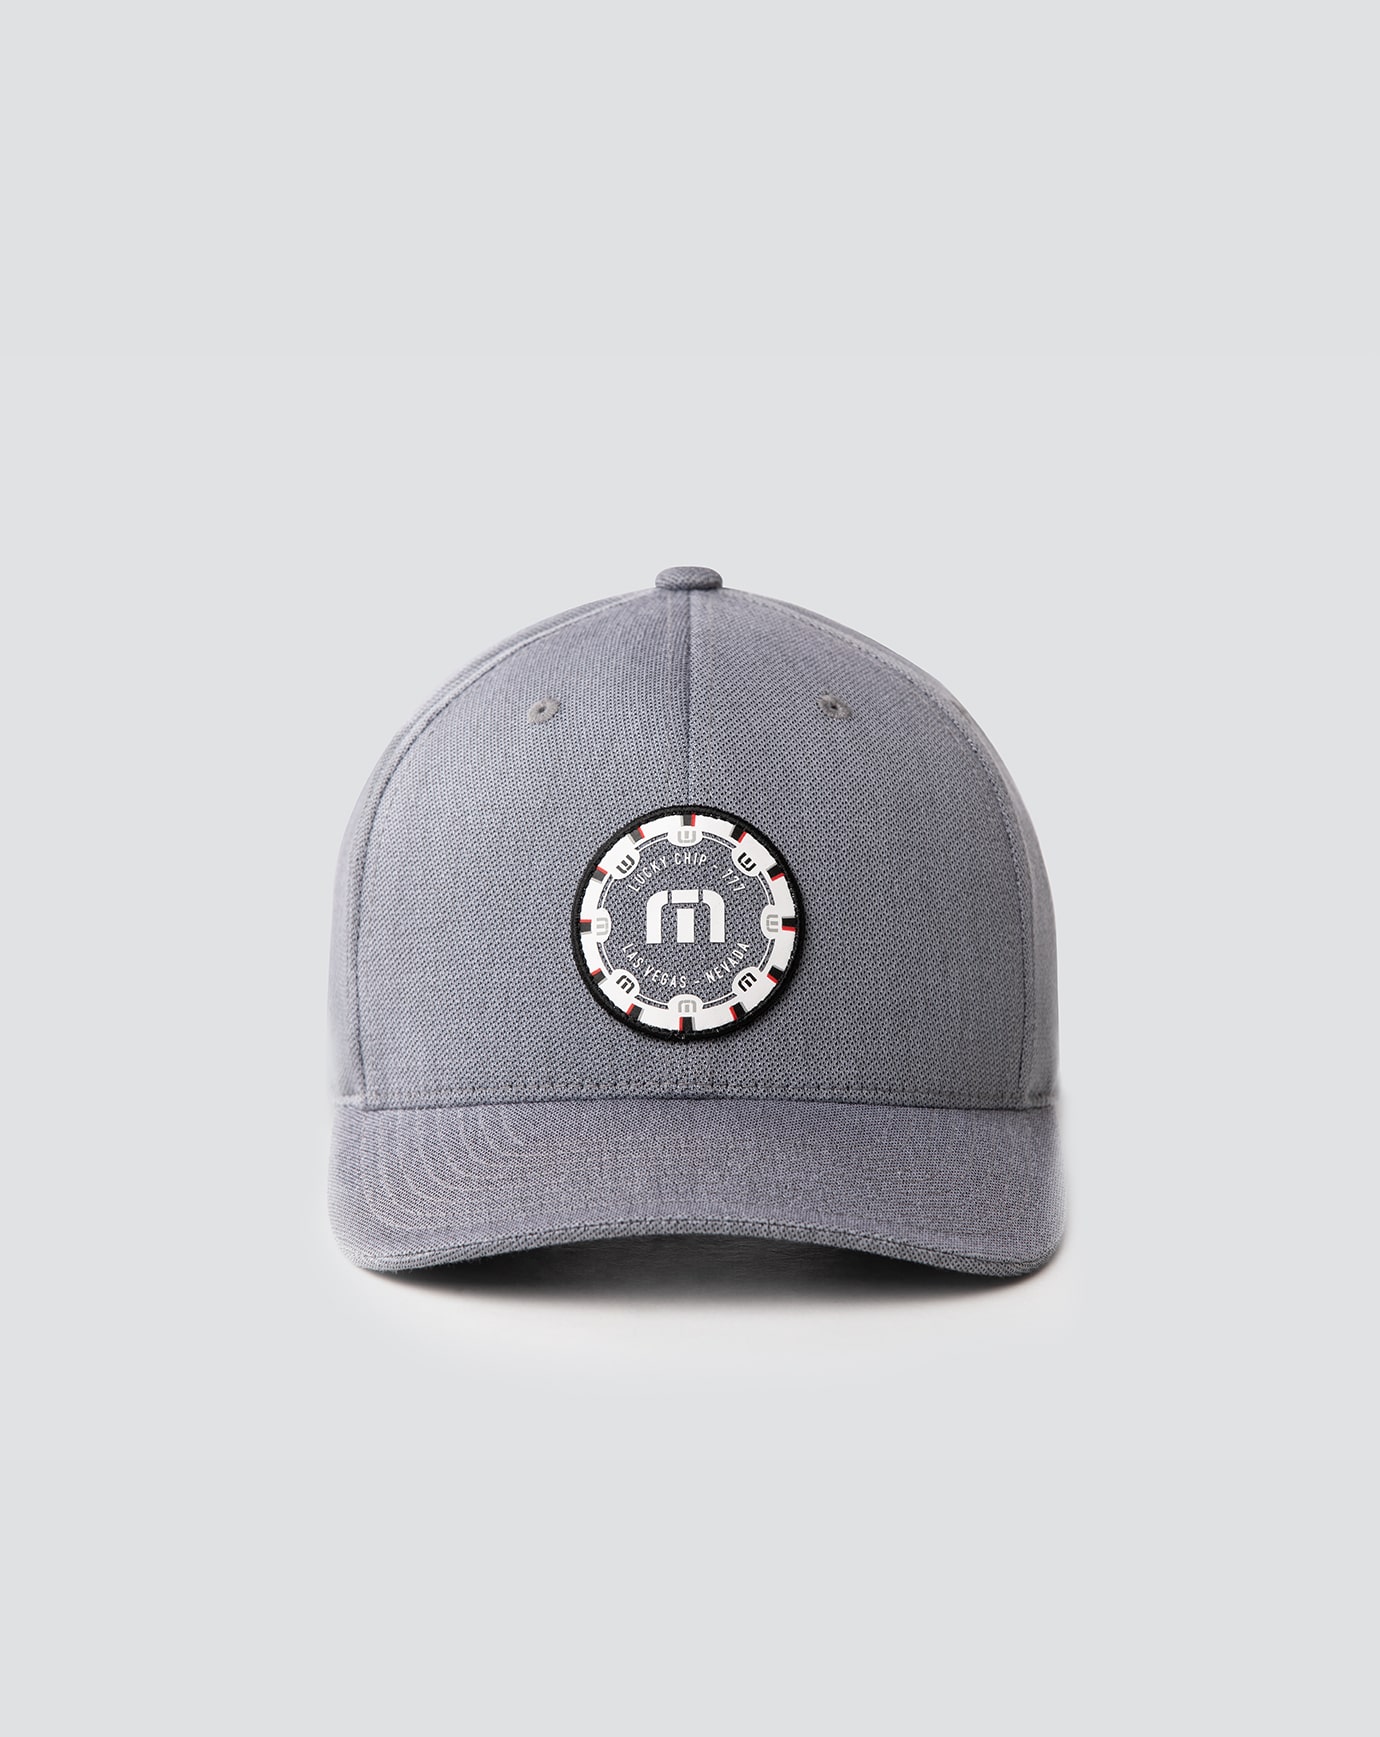 Related Product - GAMBLER SNAPBACK HAT